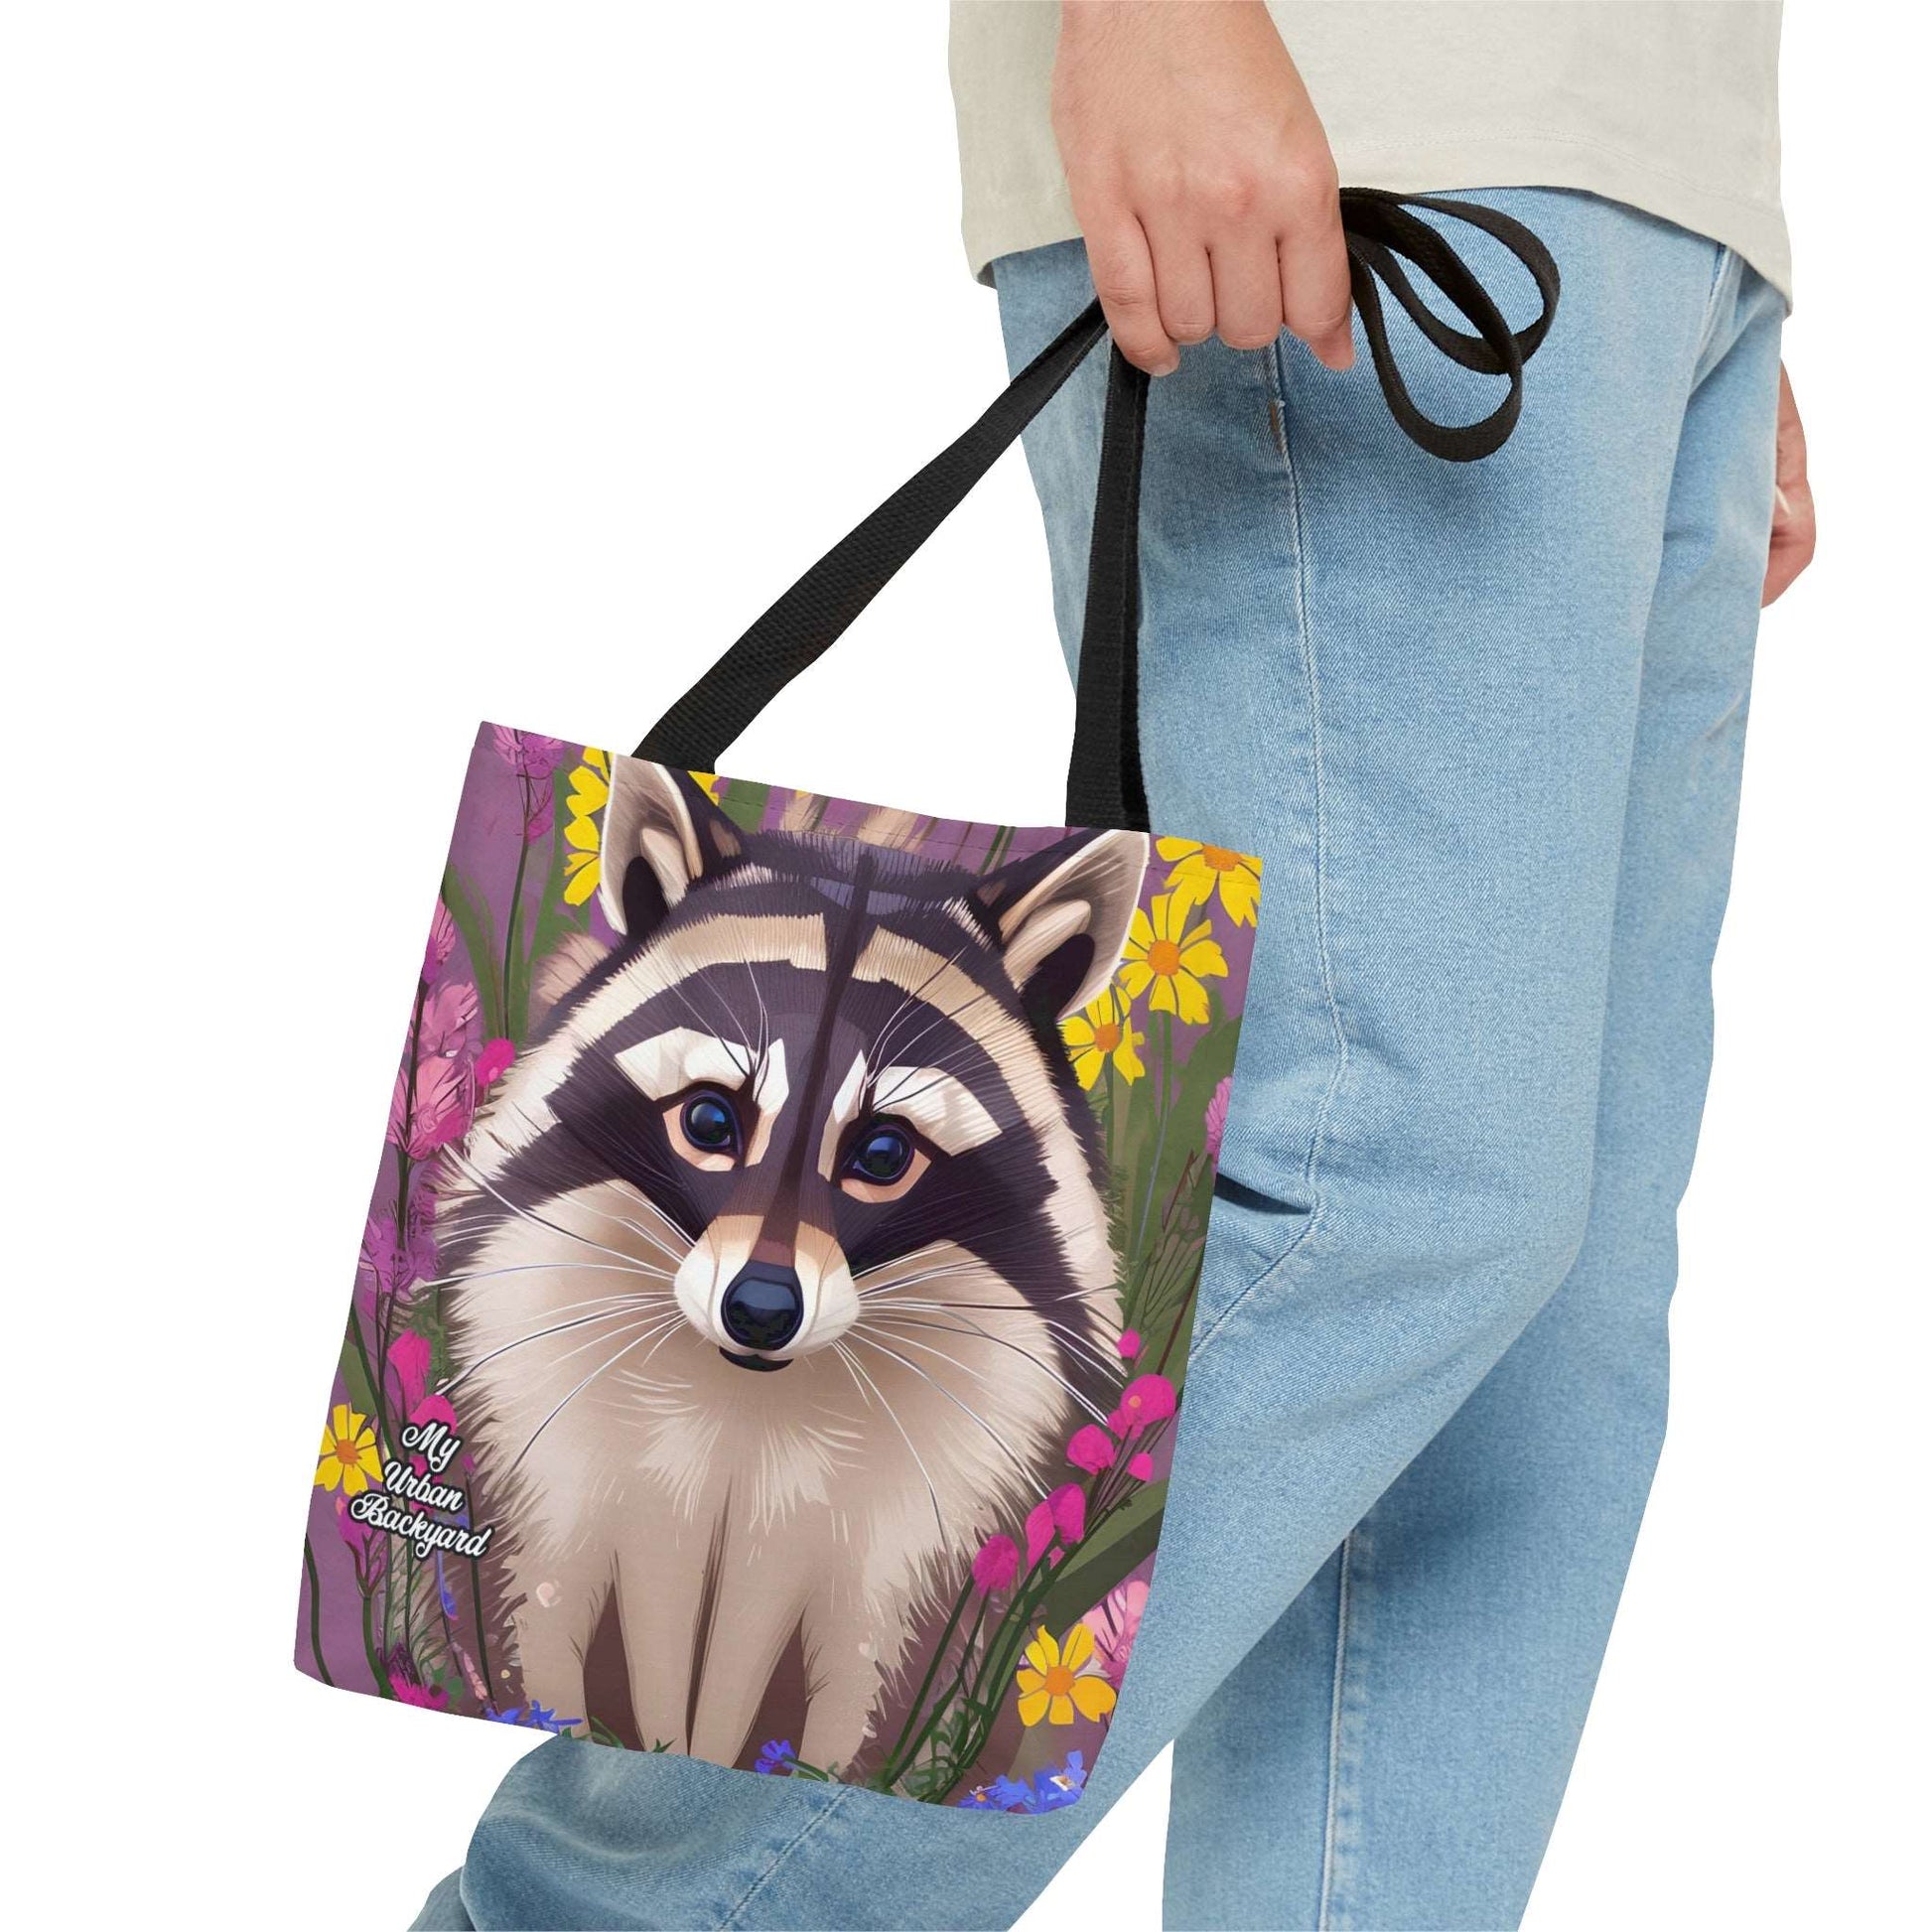 Everyday Tote Bag w Cotton Handles, Reusable Shoulder Bag, Raccoon and Flower